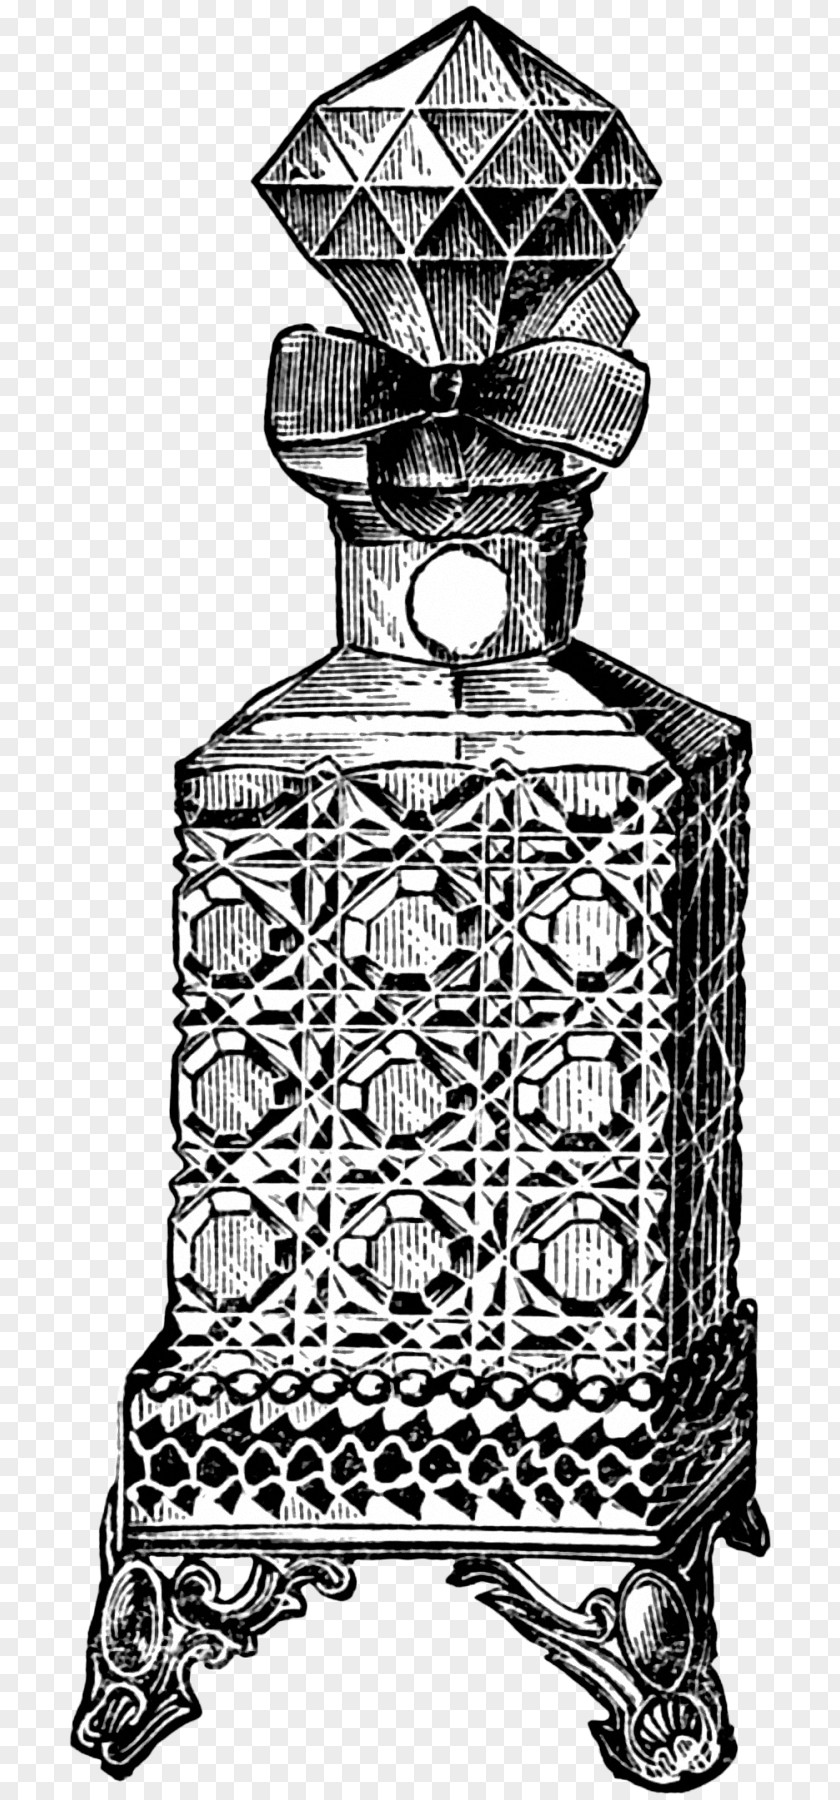 PARFUME Black And White Monochrome Photography Visual Arts PNG